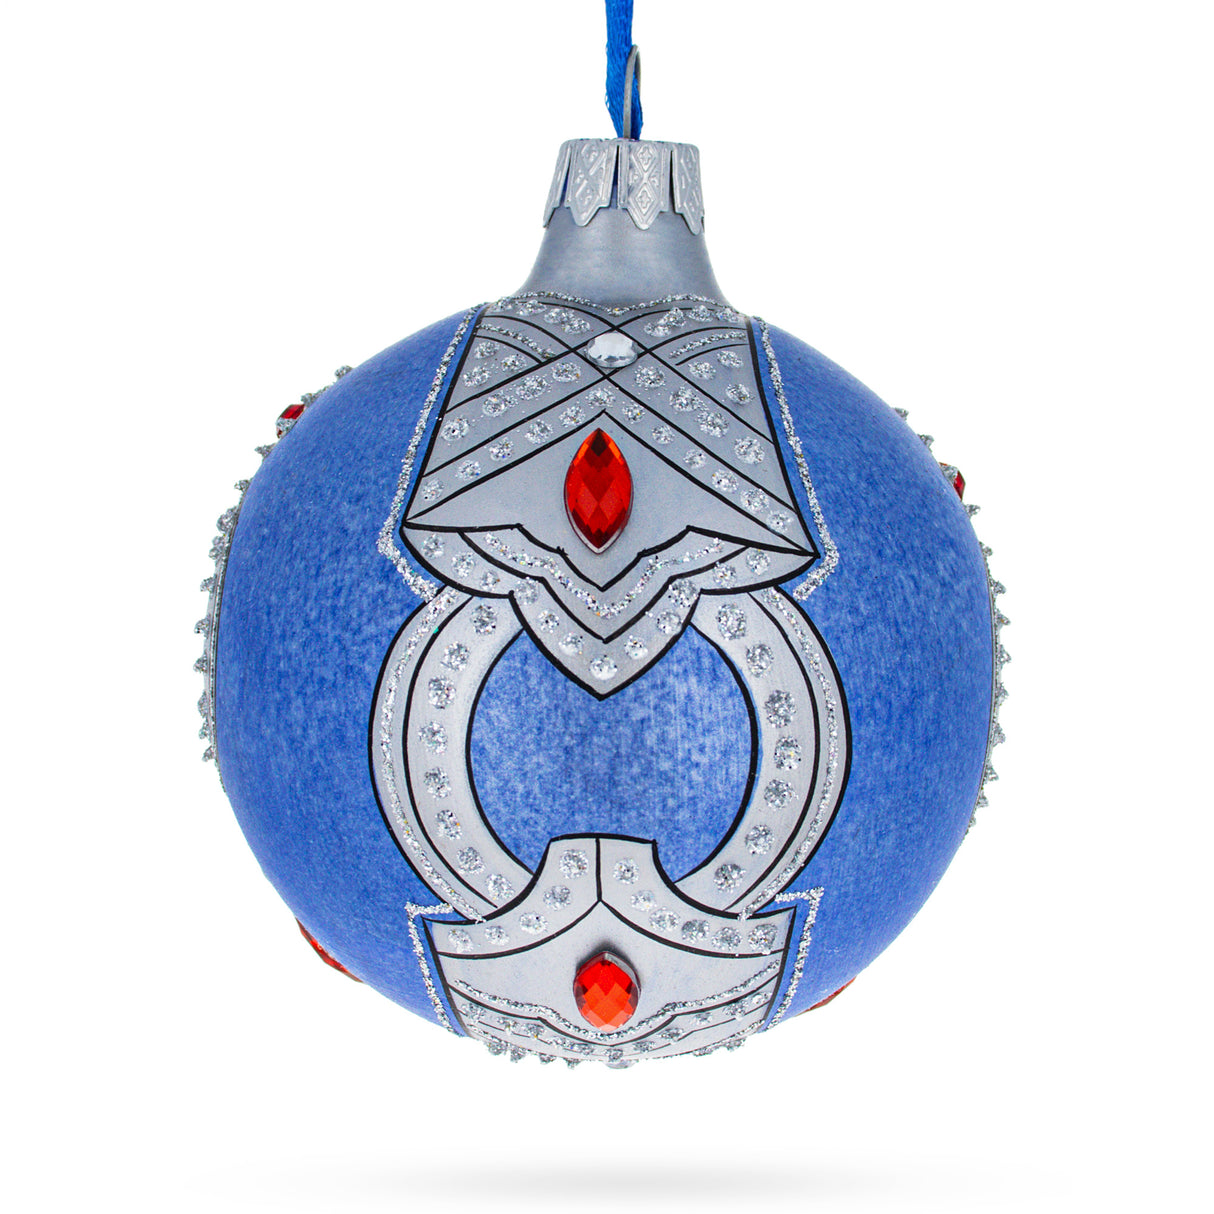 Chic Elegance: French Designer Luxury Ring Blown Glass Ball Christmas Ornament 3.25 Inches in Blue color, Round shape